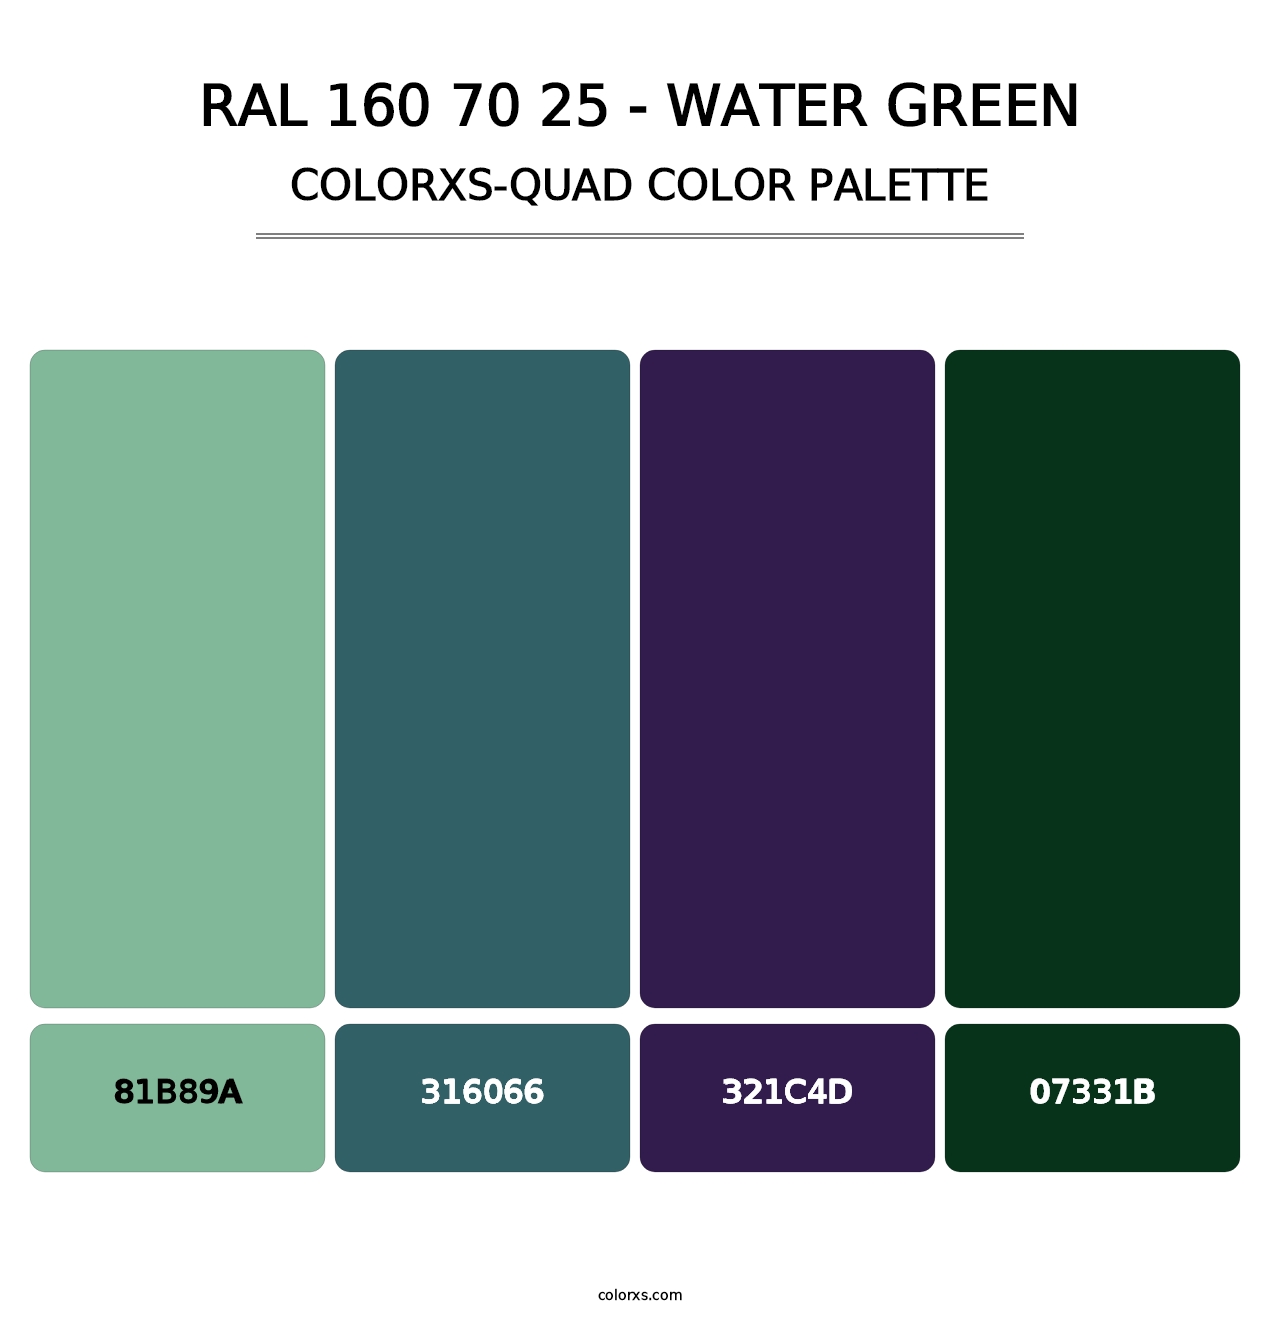 RAL 160 70 25 - Water Green - Colorxs Quad Palette